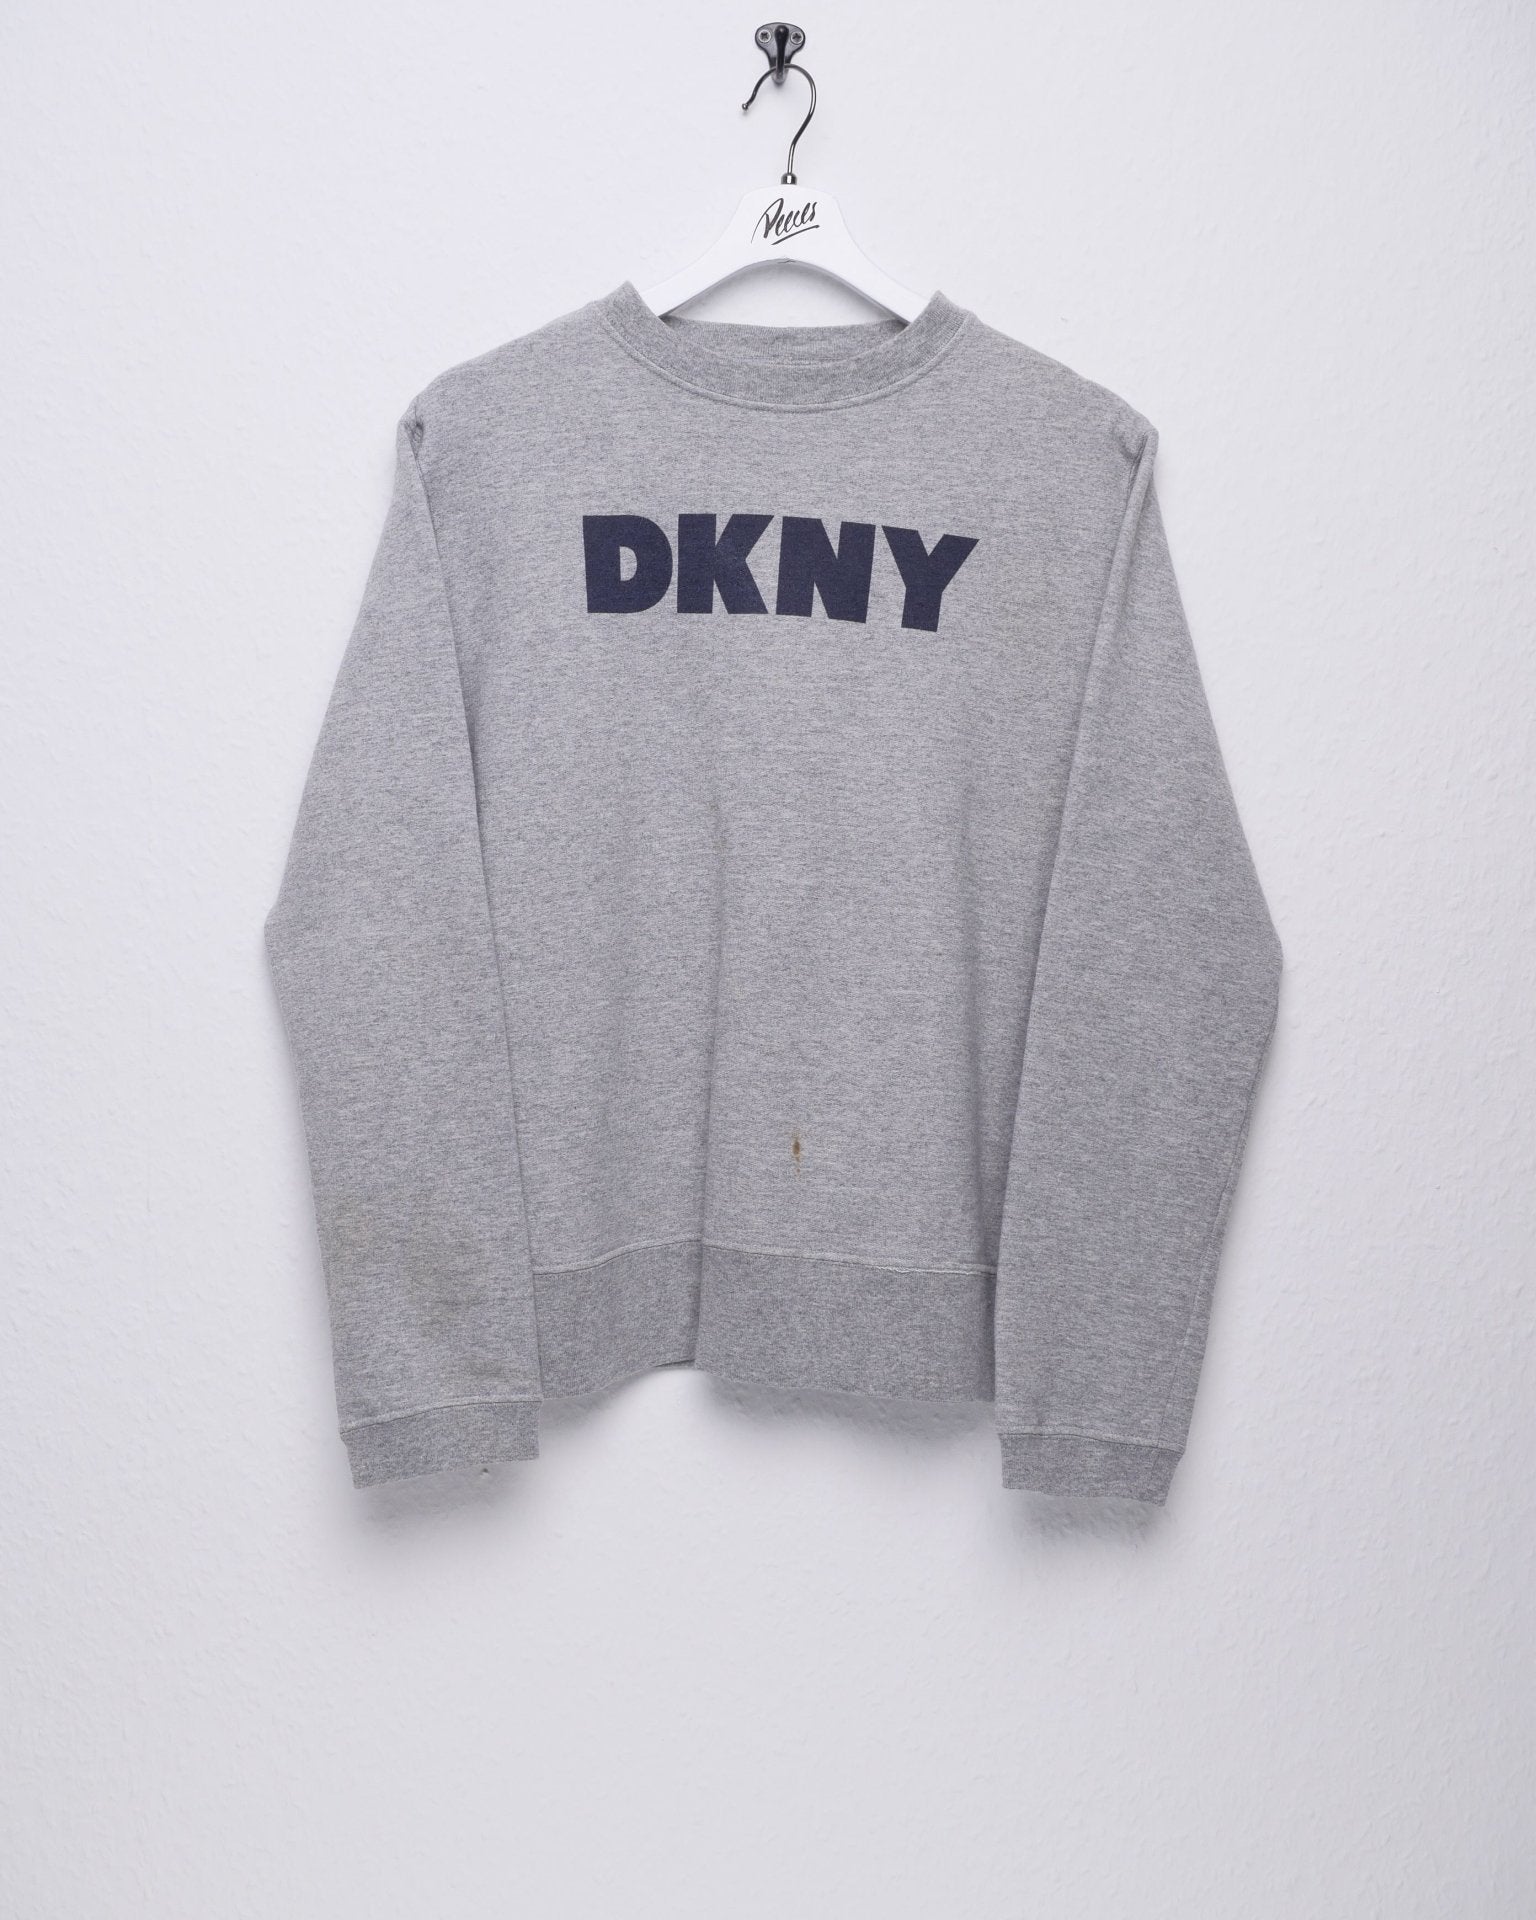 dkny printed Spellout grey Sweater - Peeces